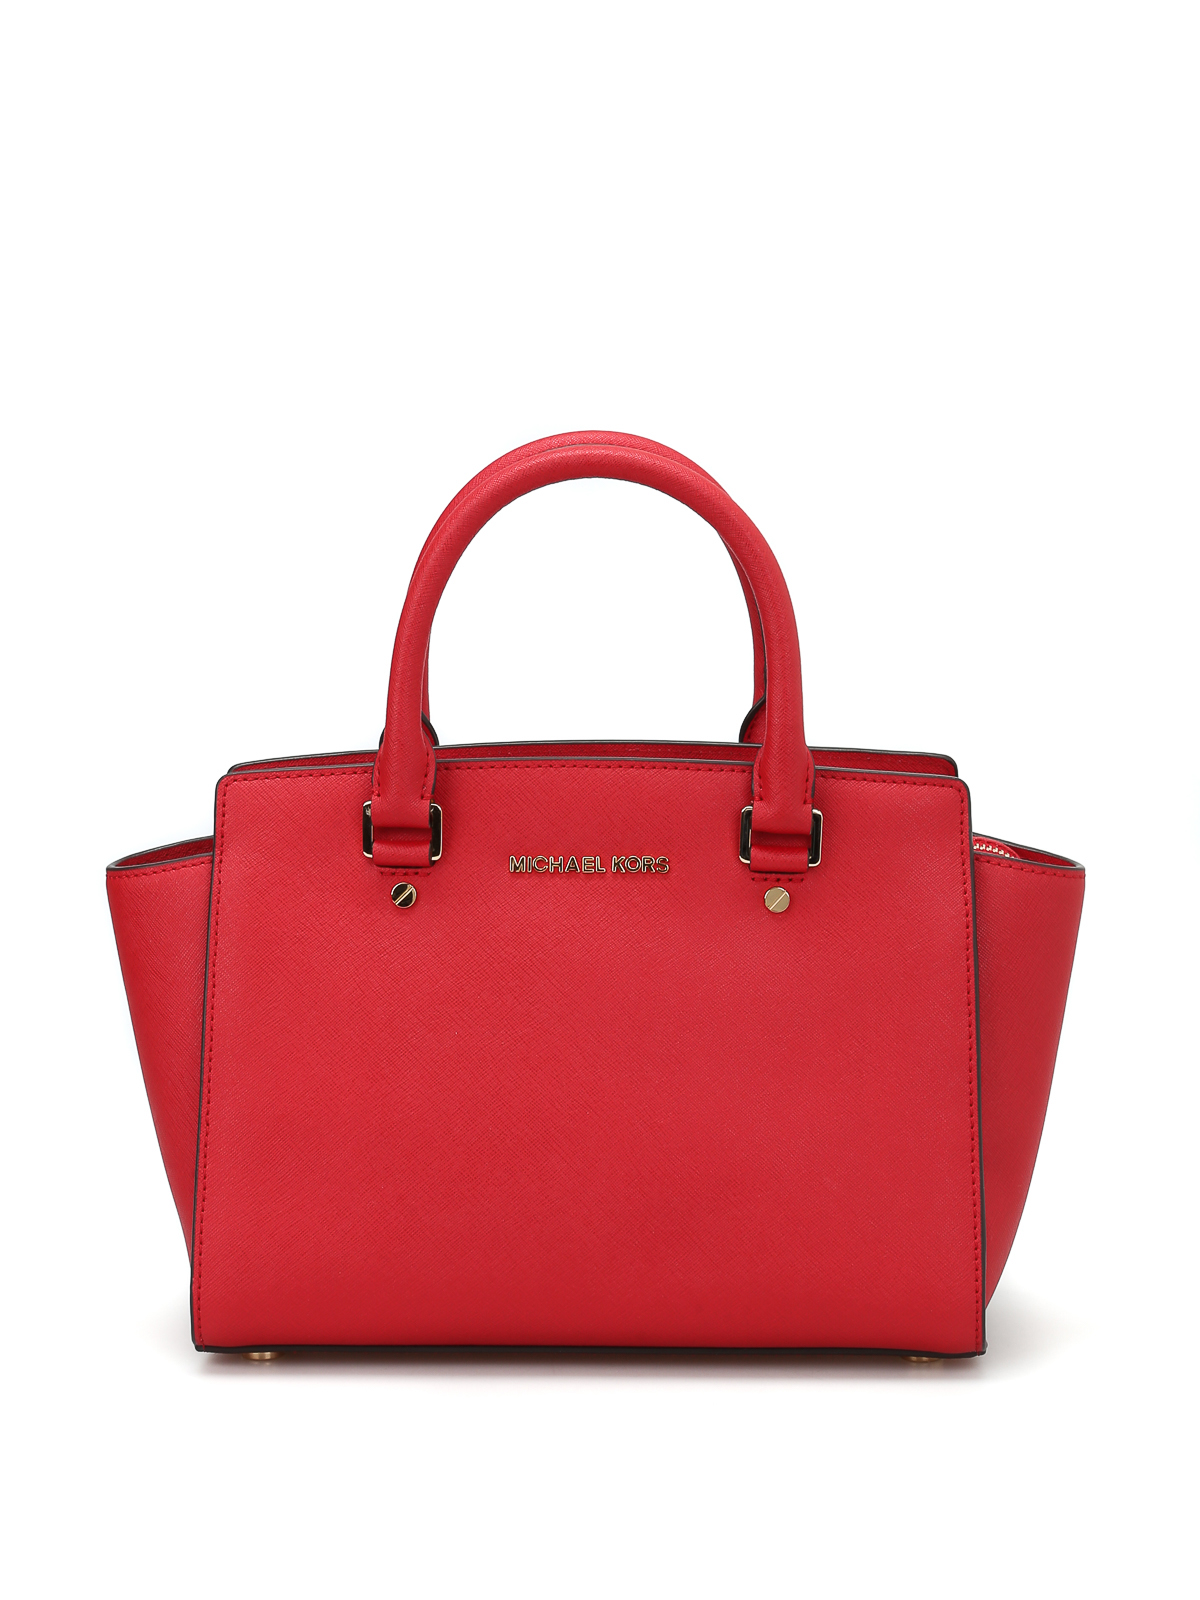 Michael Kors Selma Medium in Saffiano Leather - what fits? 